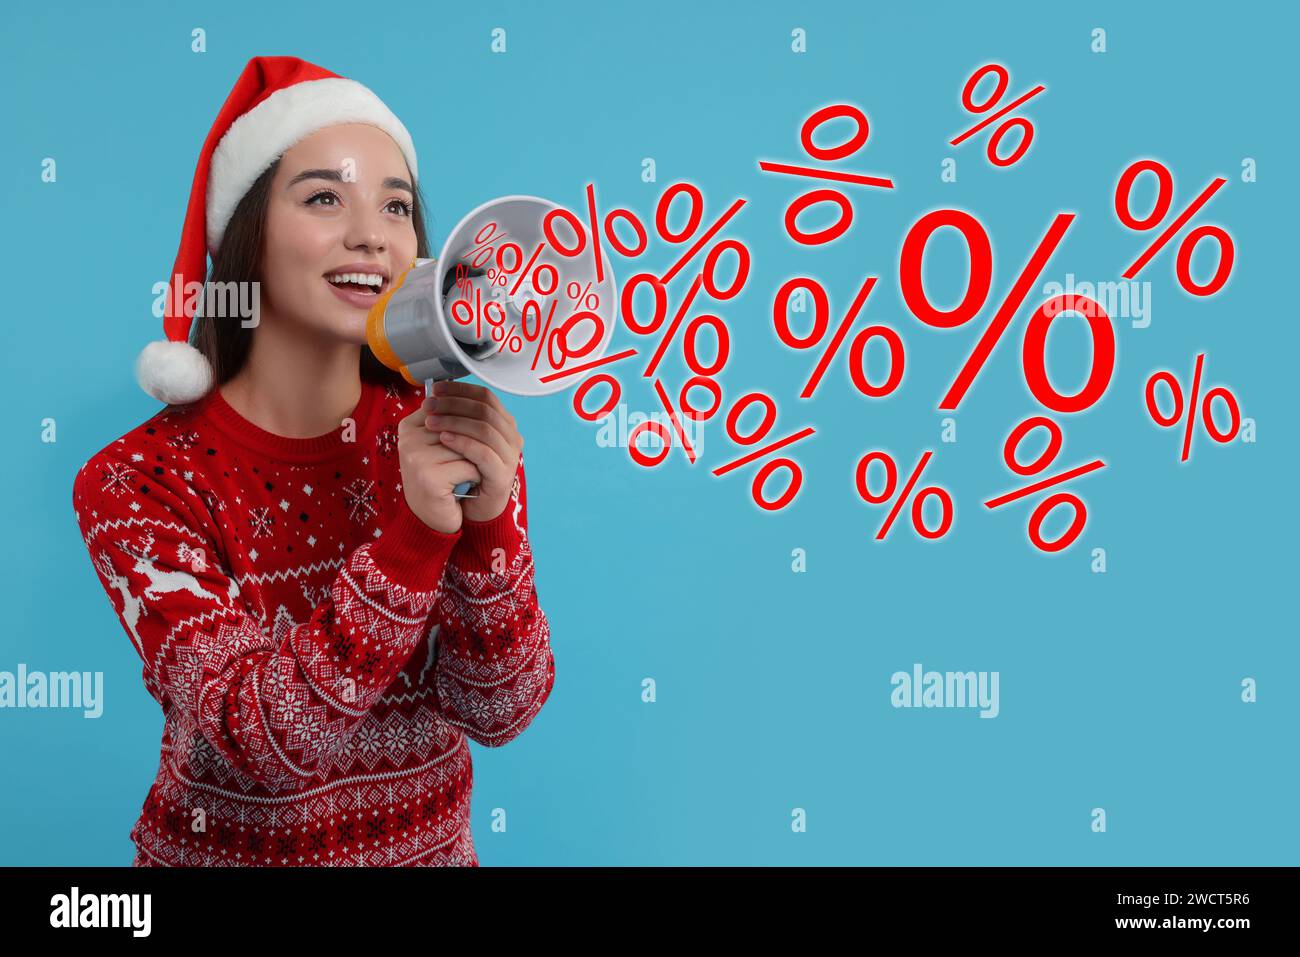 Discount offer. Woman in Christmas sweater and Santa hat shouting in megaphone on light blue background. Percent signs flying out of device Stock Photo